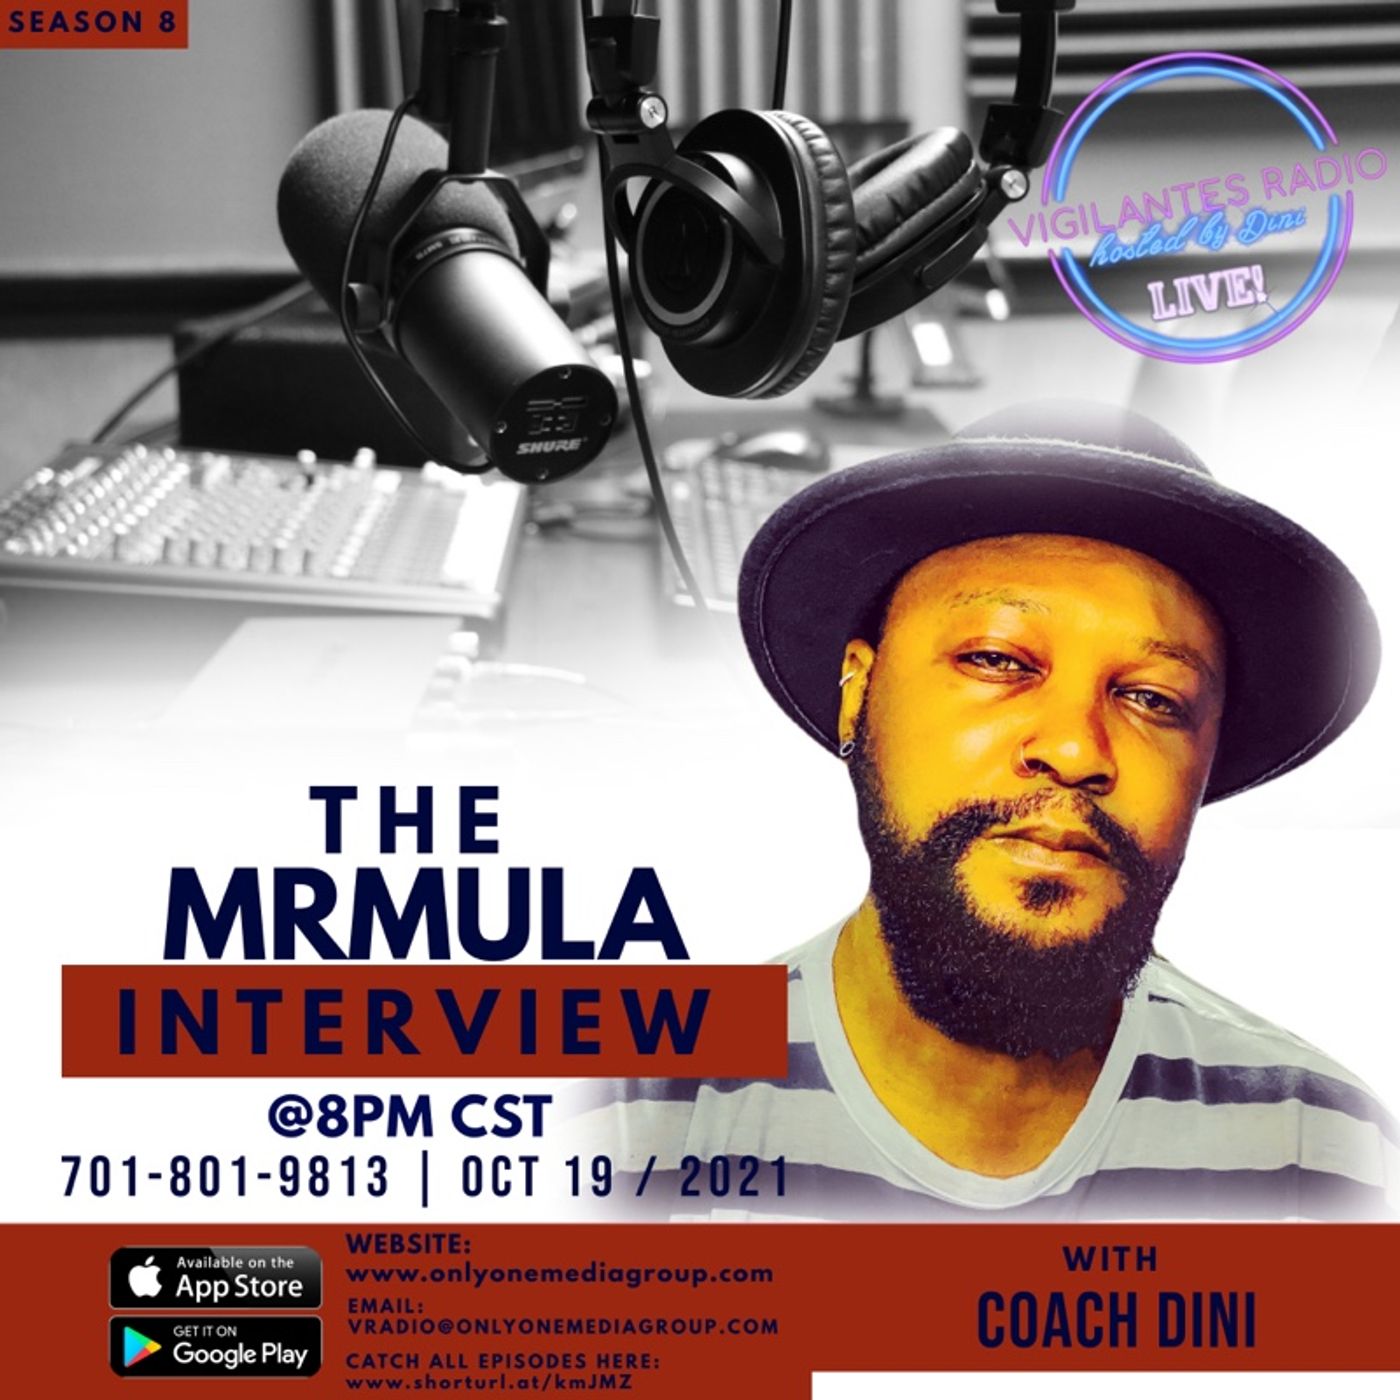 The MrMula Interview. Image